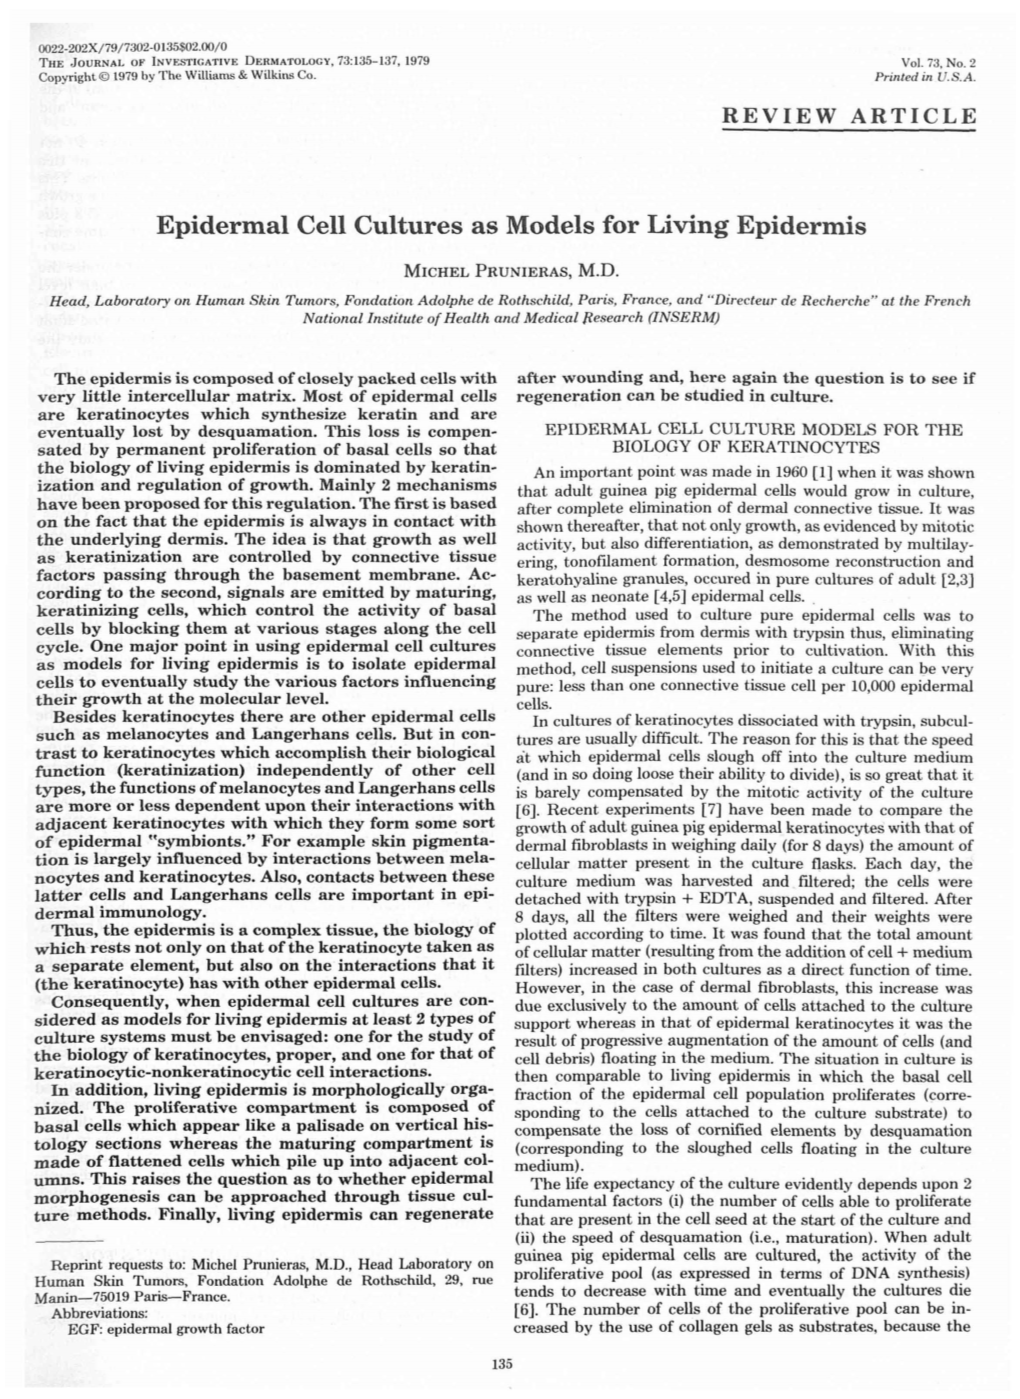 Epidermal Cell Cultures As Models for Living Epidermis